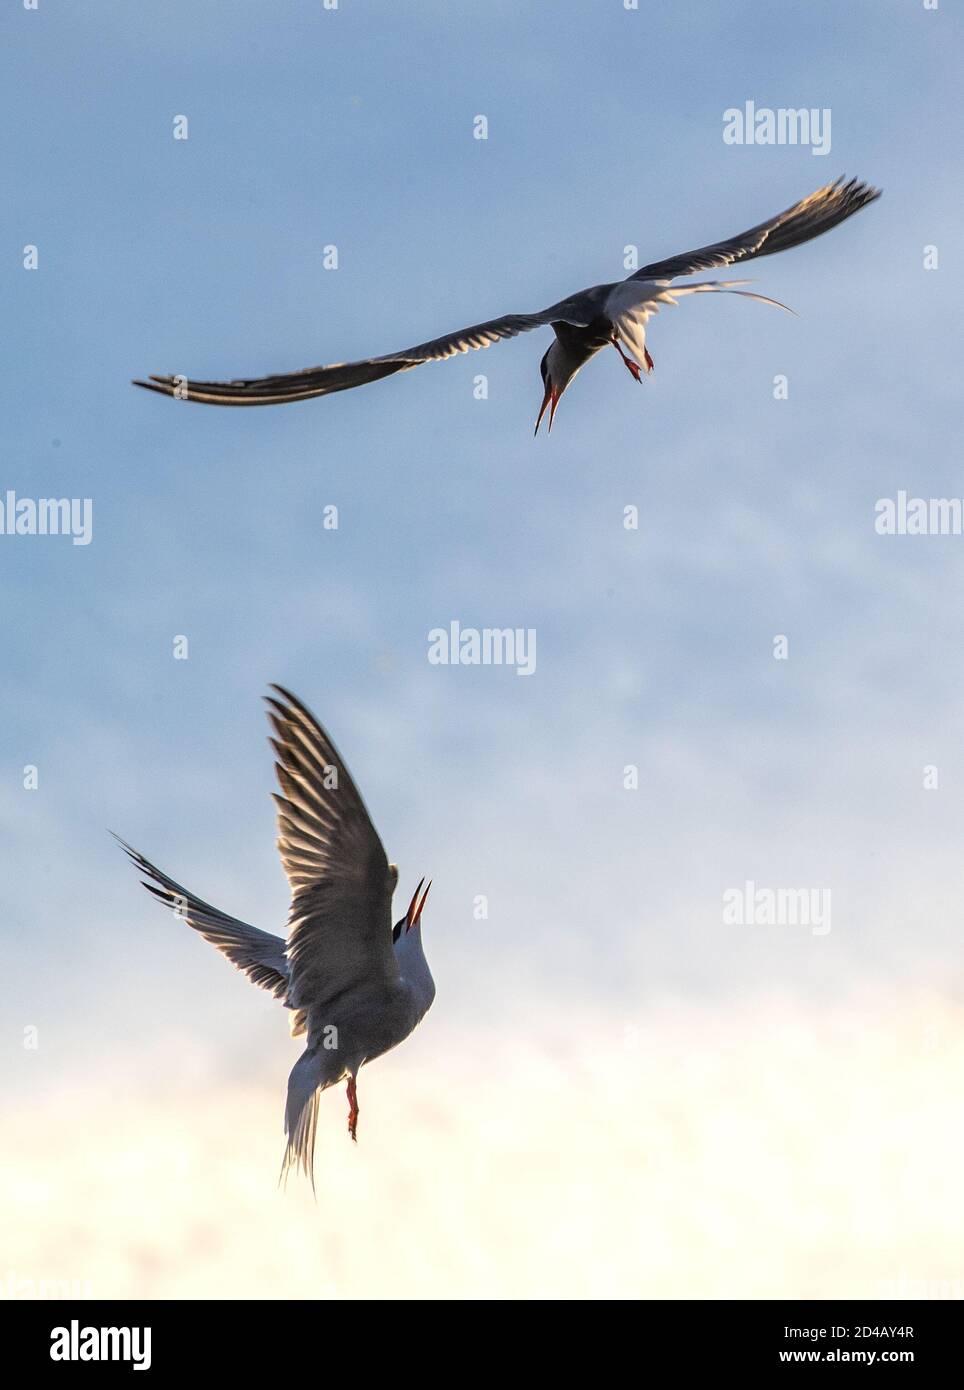 Showdown in the sky. Common Terns interacting in flight. Adult common terns in flight  in sunset light on the sky background. Scientific name: Sterna Stock Photo